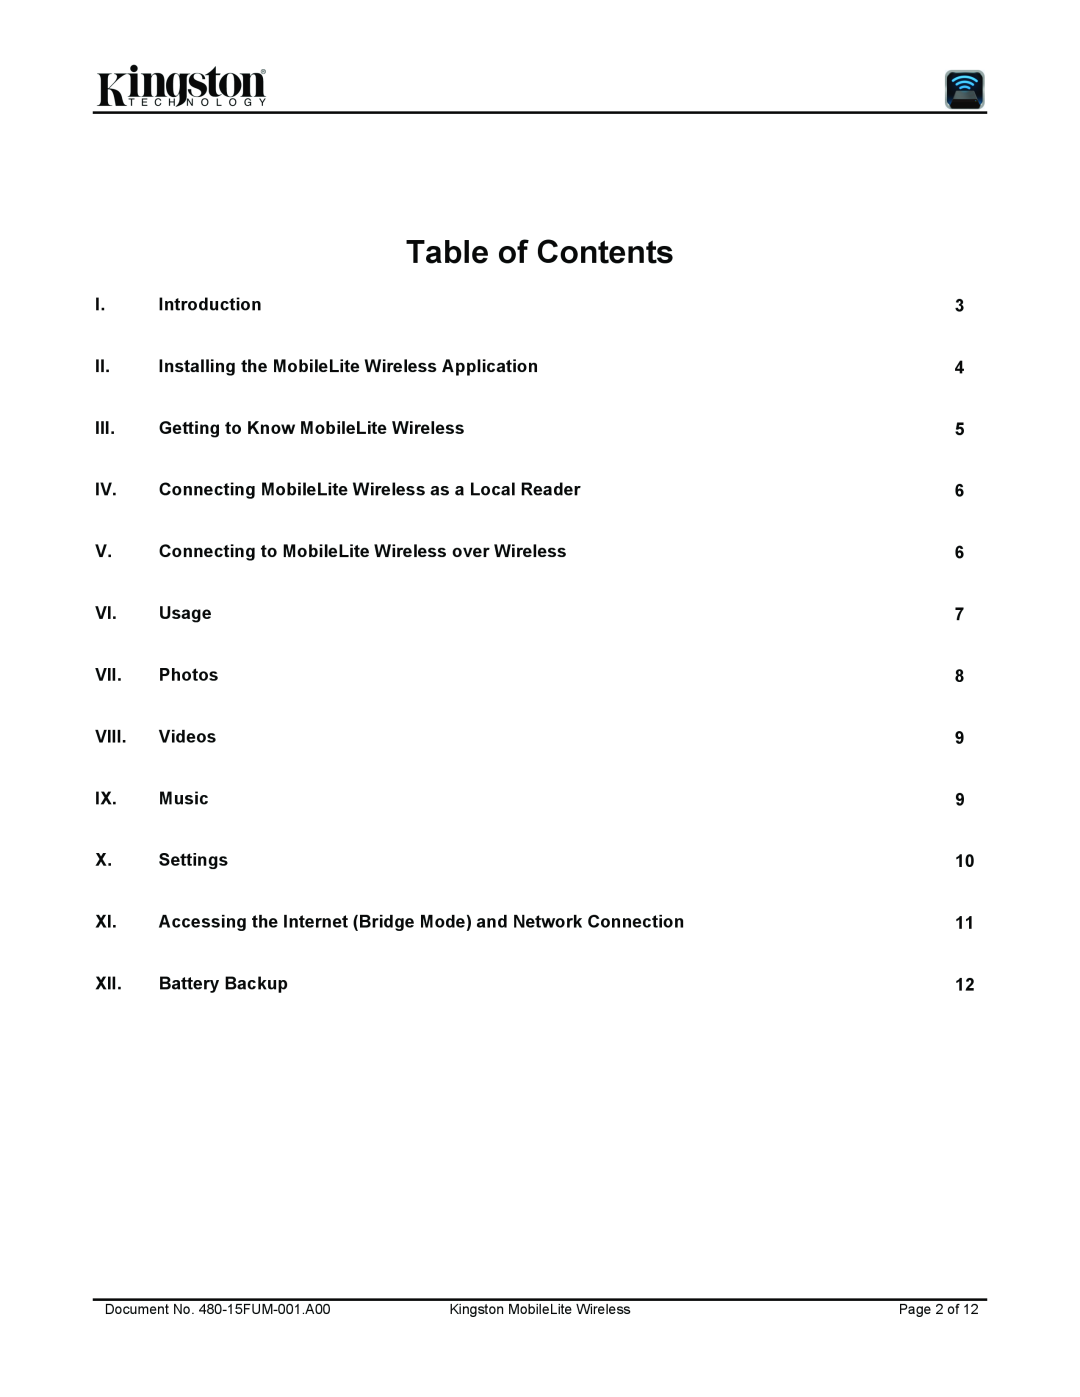 Kingston Technology 480-15FUM-001.A00 Table of Contents, III. Getting to Know MobileLite Wireless, XII. Battery Backup 